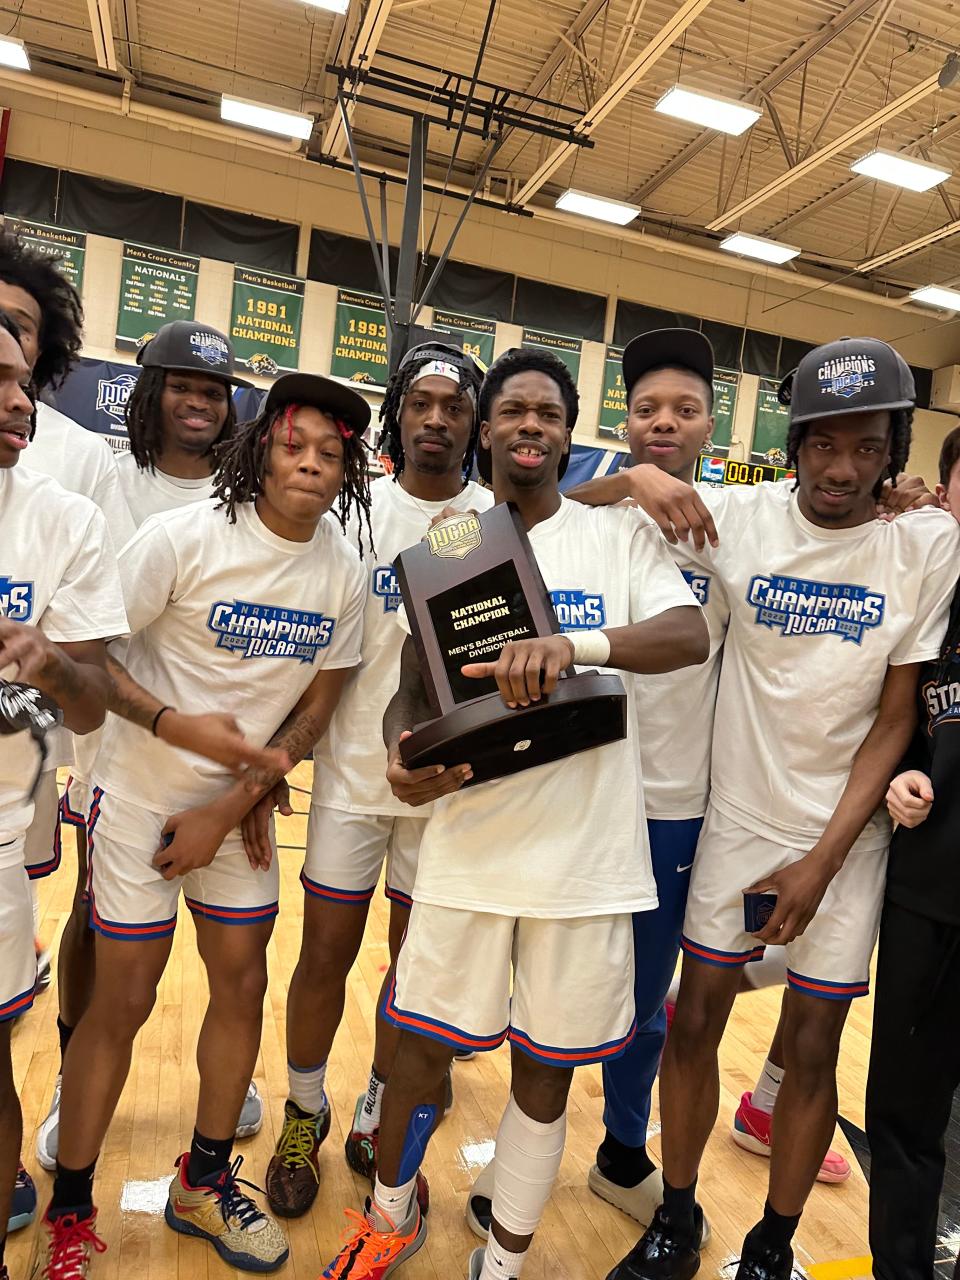 The MATC Stormers won their first NJCAA national championship on Saturday in Danville, Illinois.